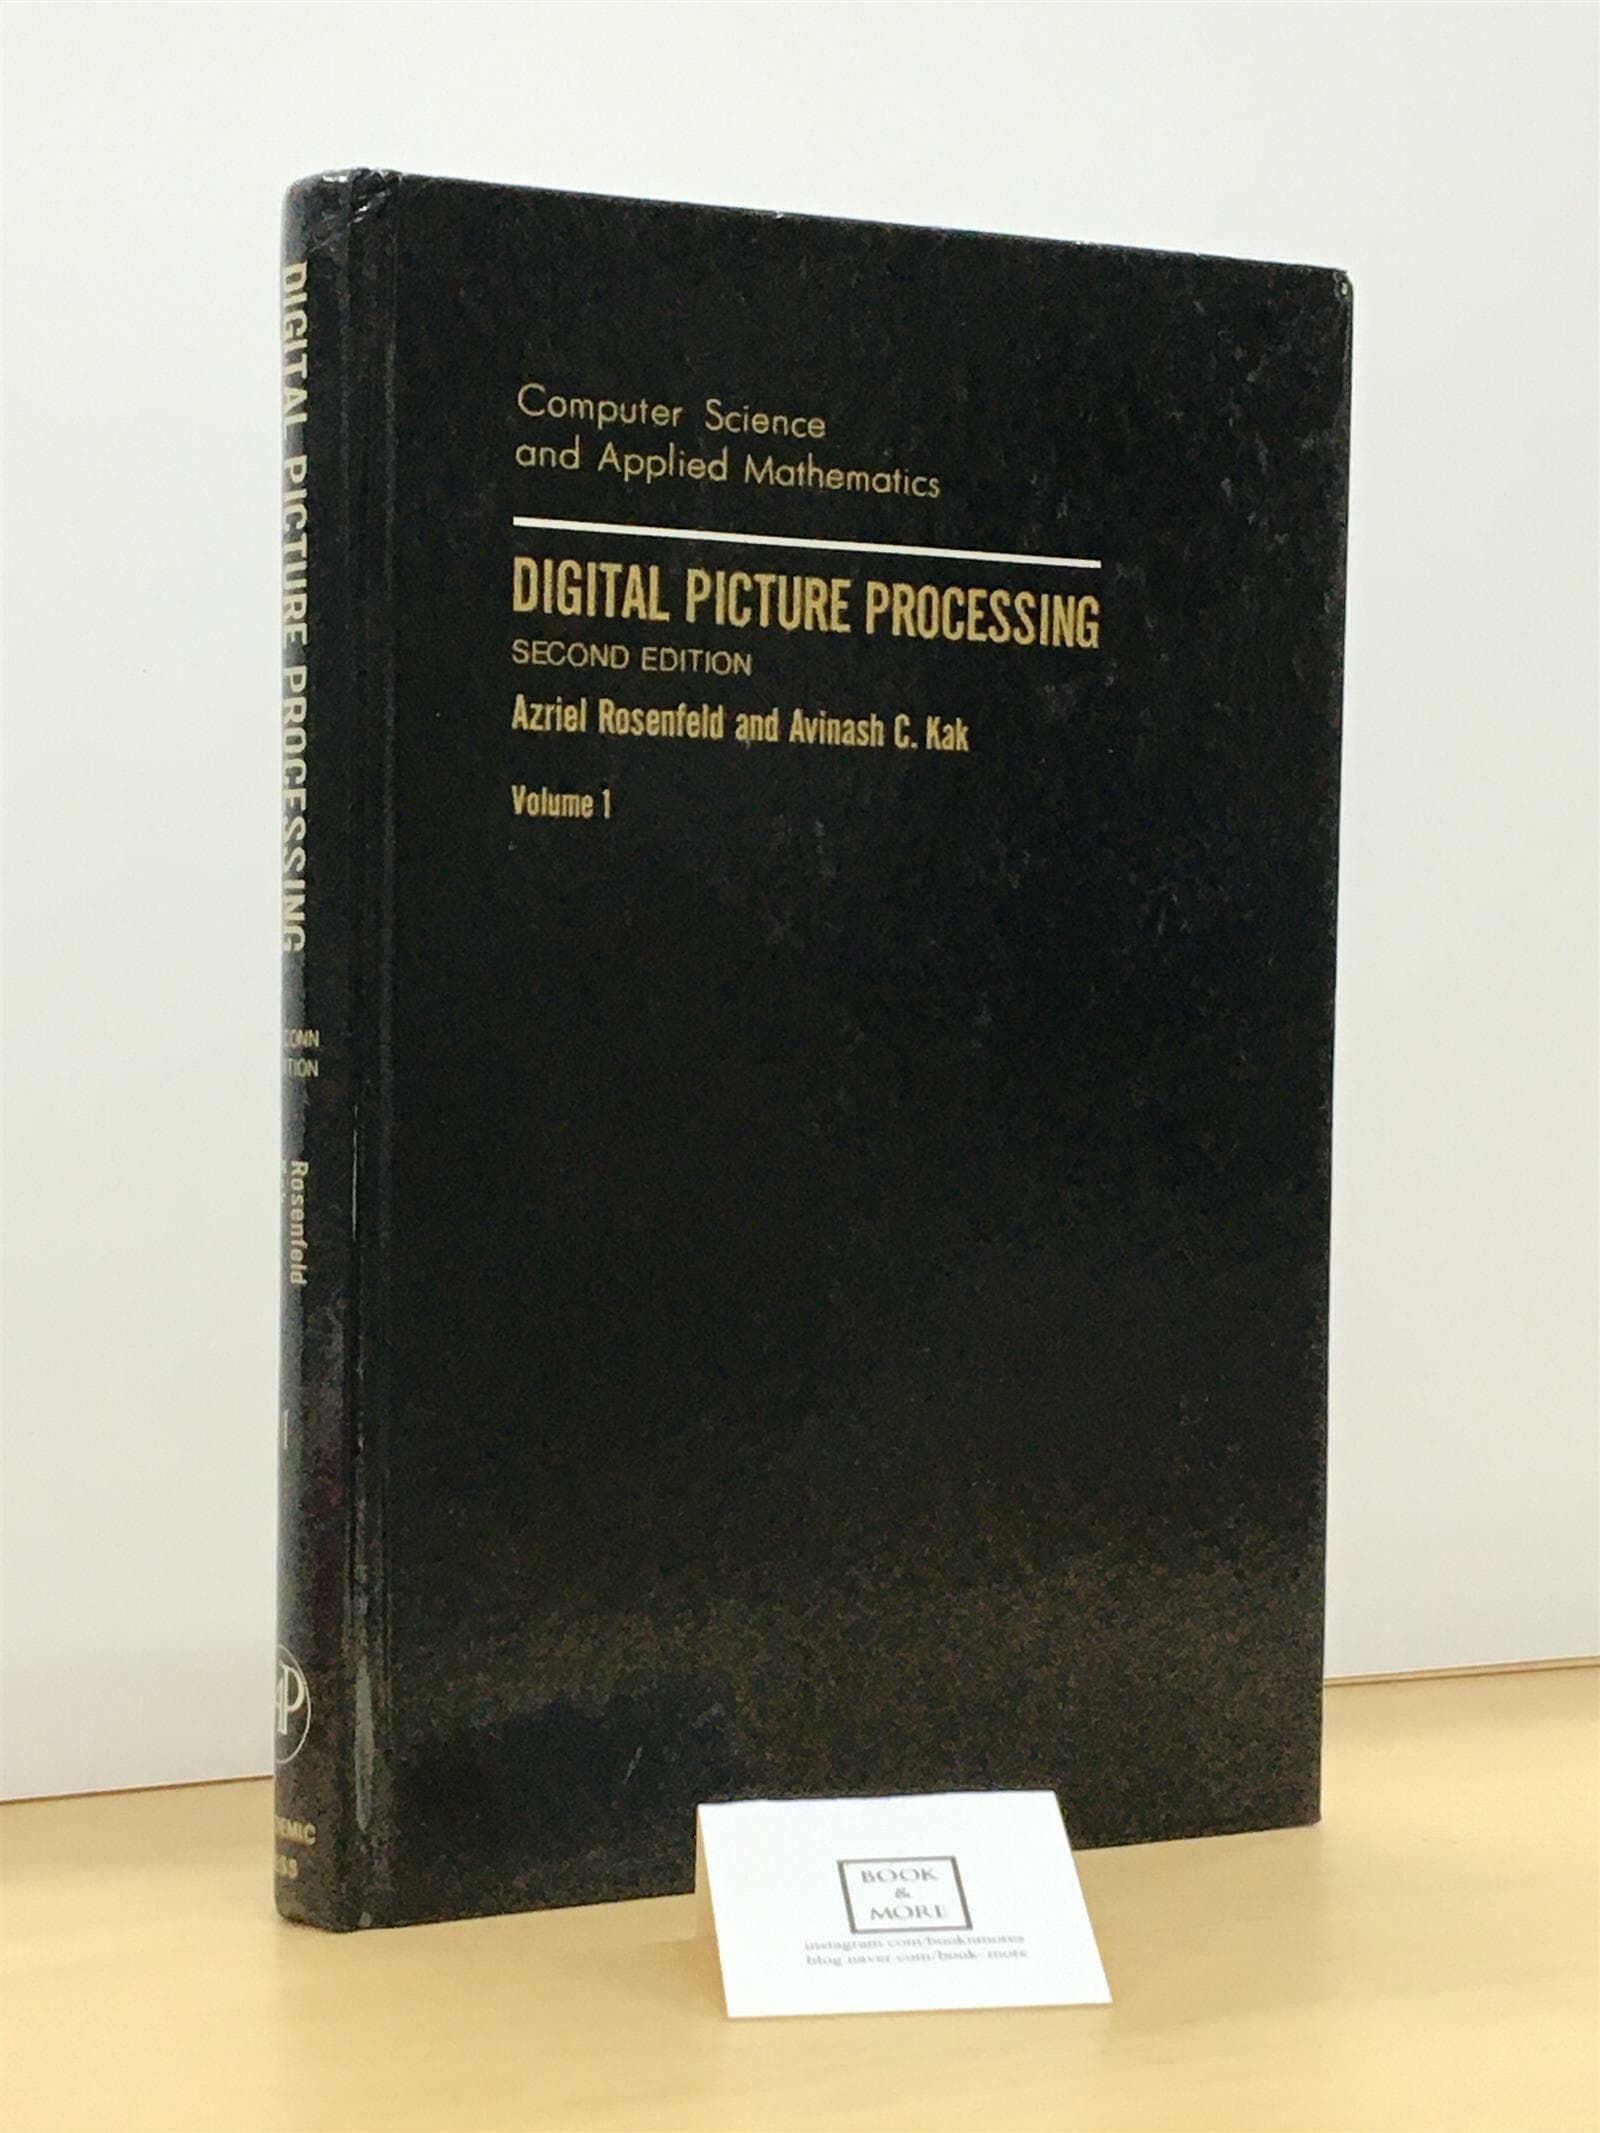 Digital Picture Processing, Volume 1, Second Edition (Computer Science and Applied Mathematics)-- 상태 :중급